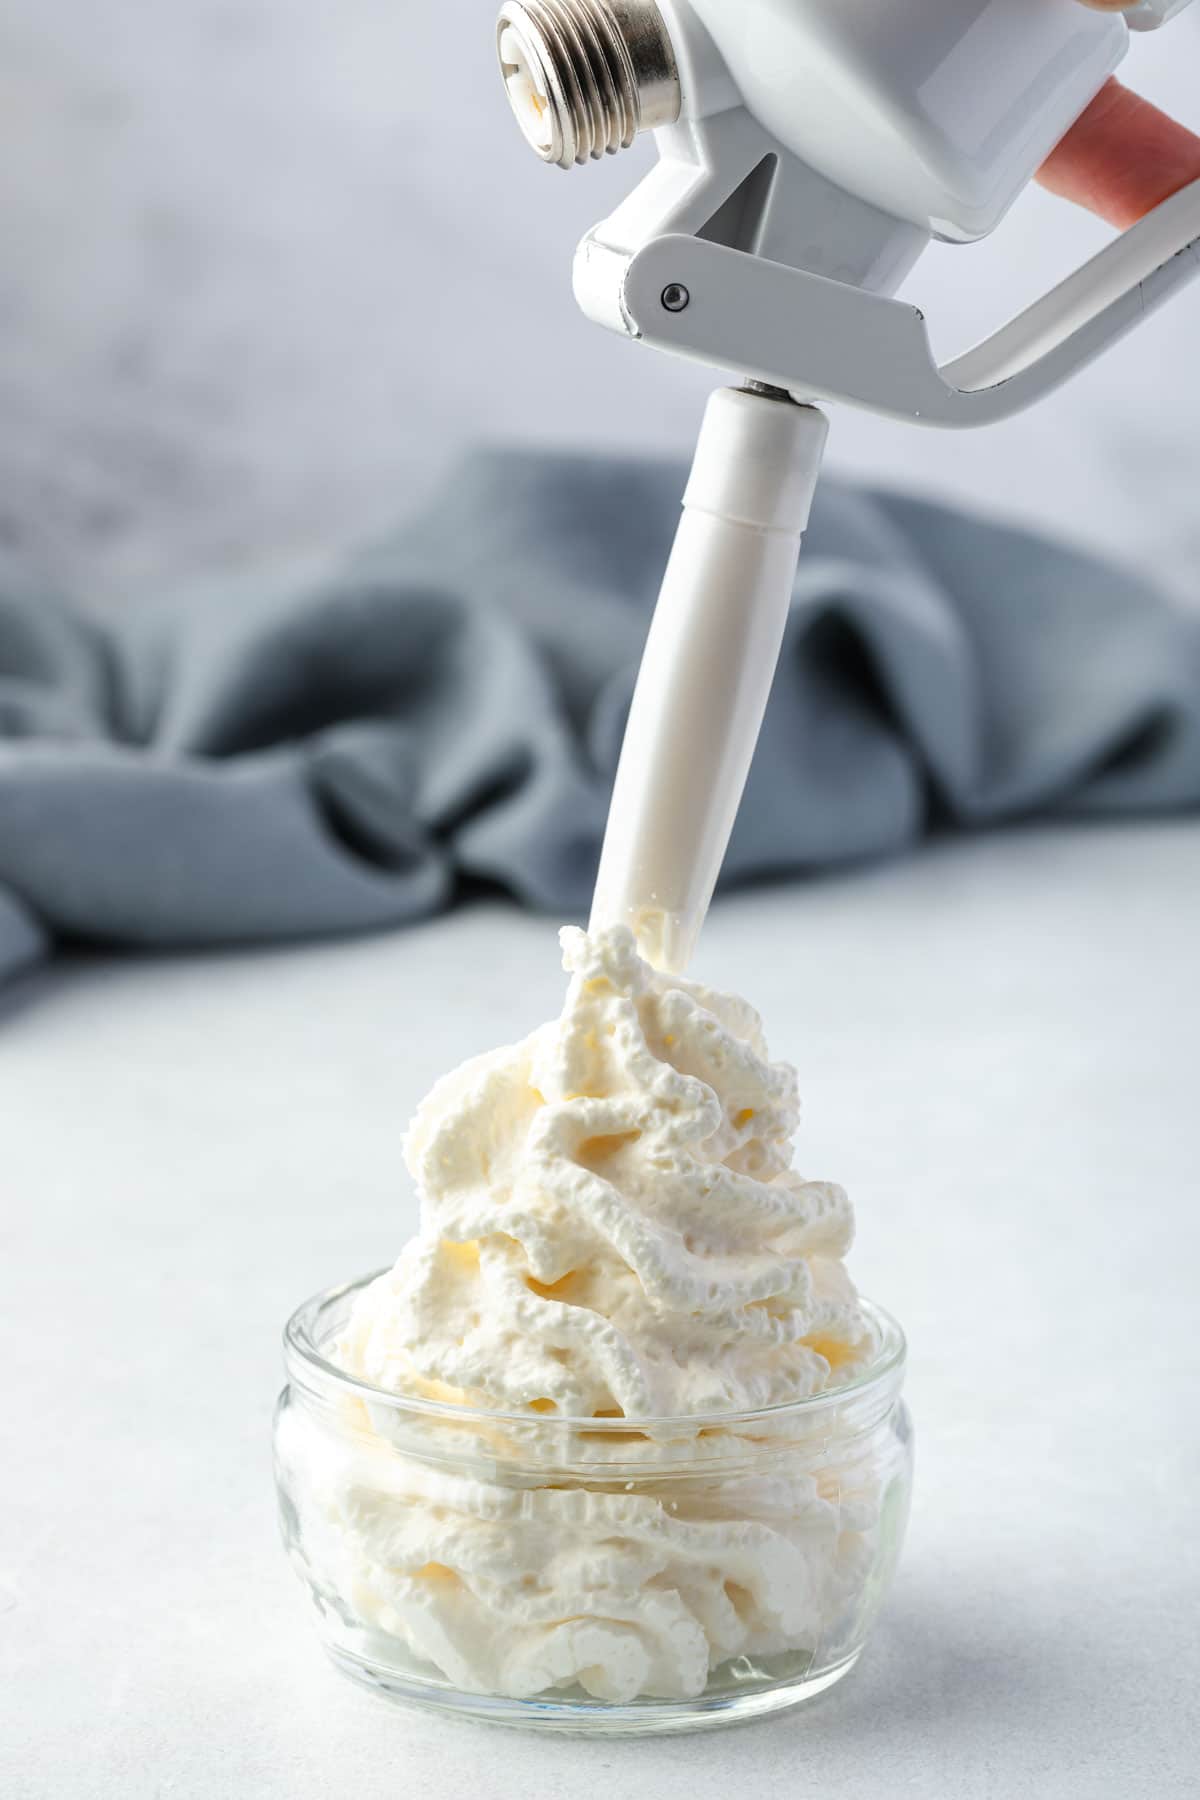 Dispensing whipped cream into a shallow jar.